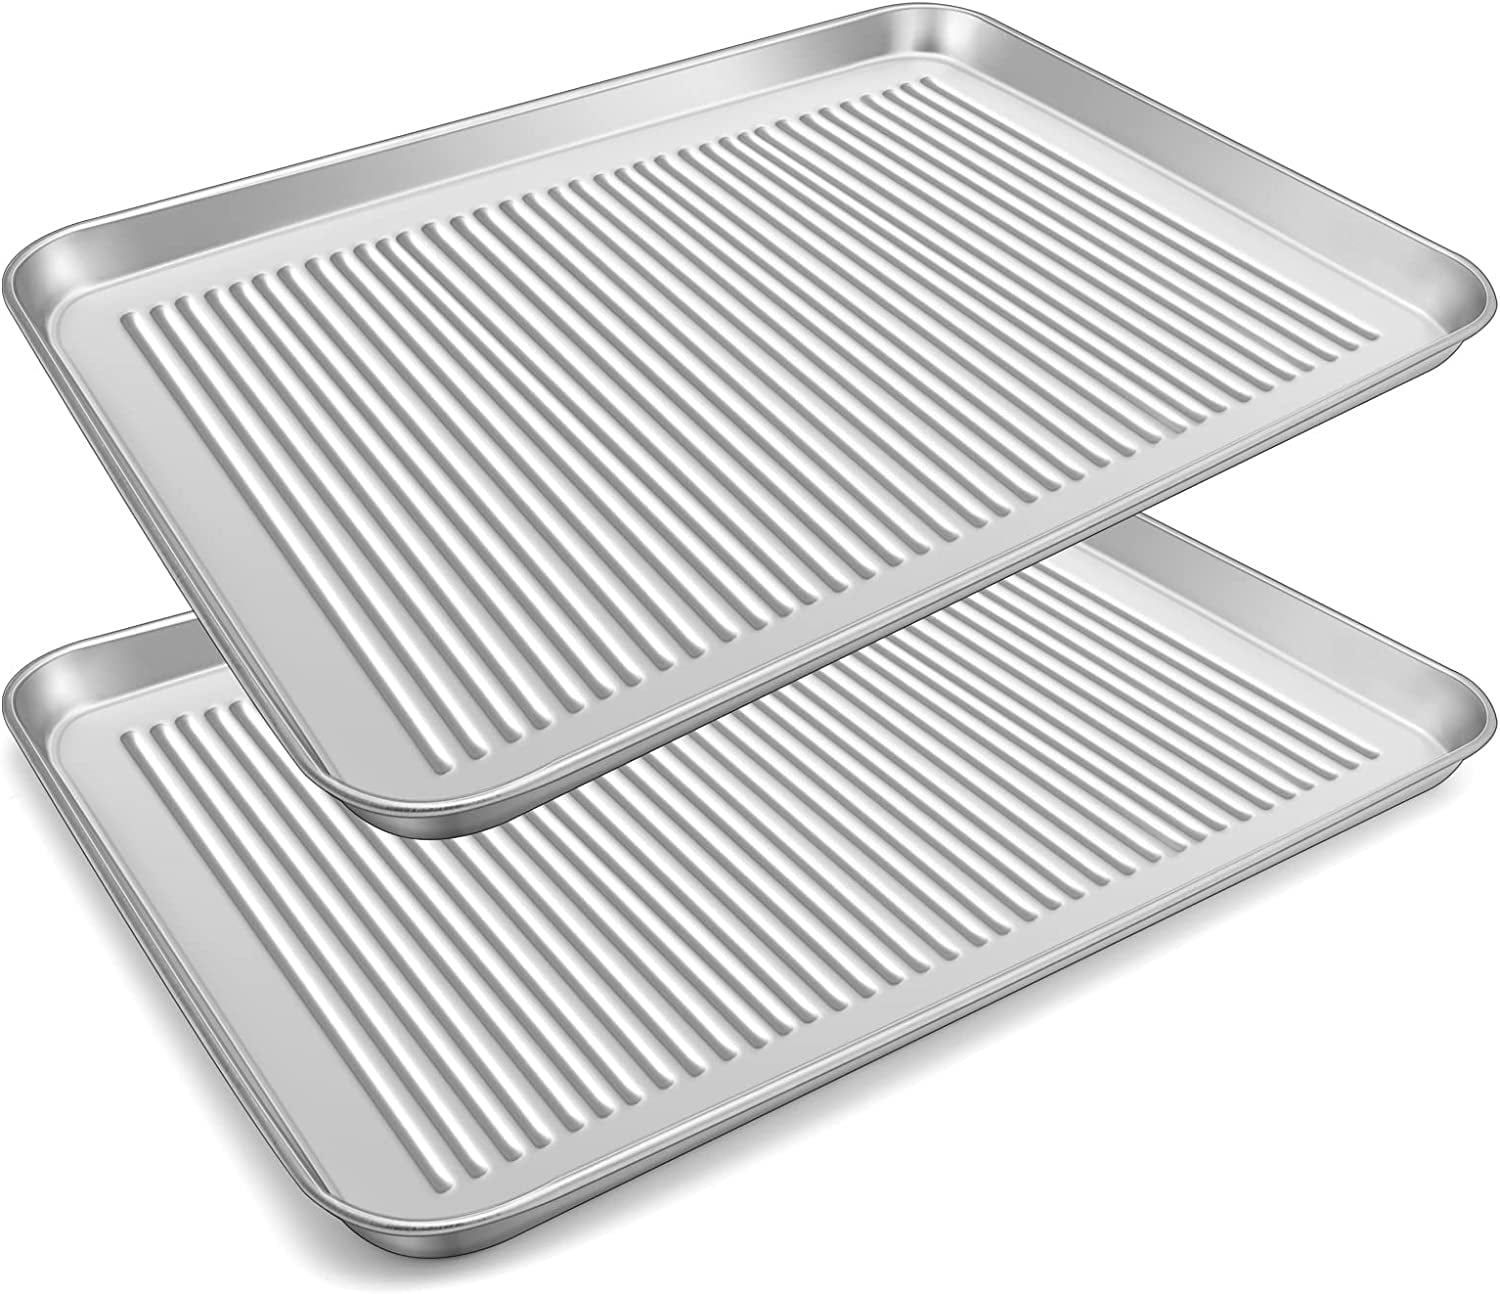 Toaster Oven Baking Pan with Lid, Vesteel 10.4”x 8”x 2” Stainless Steel  Rectangle Sheet Cake Pans with Covers, Small Bakeware for Cakes Brownies